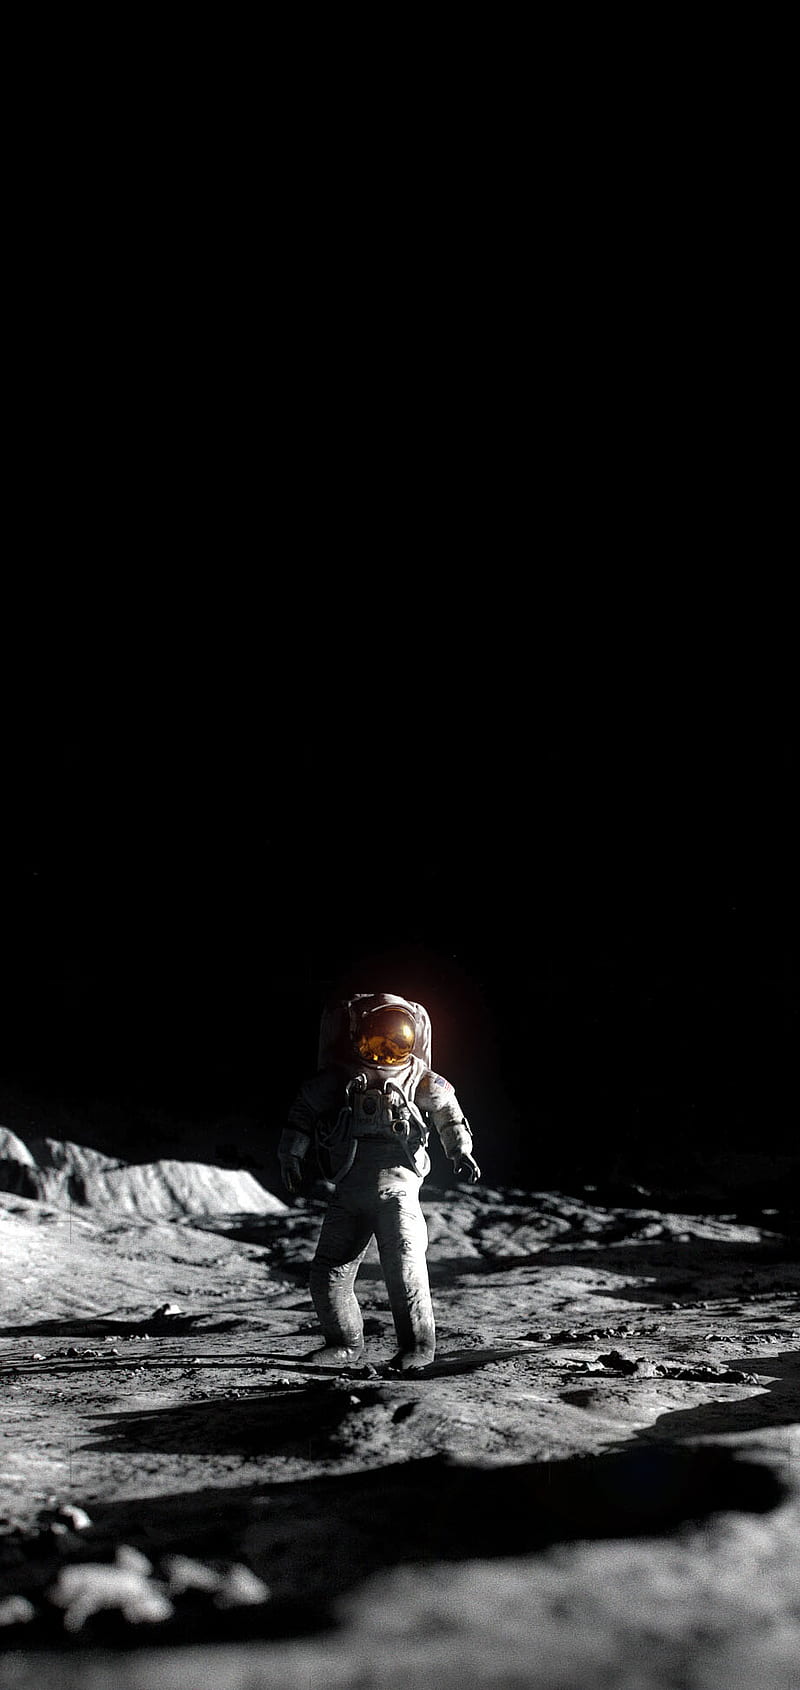 Amoled - Astronaut in the moon, HD phone wallpaper